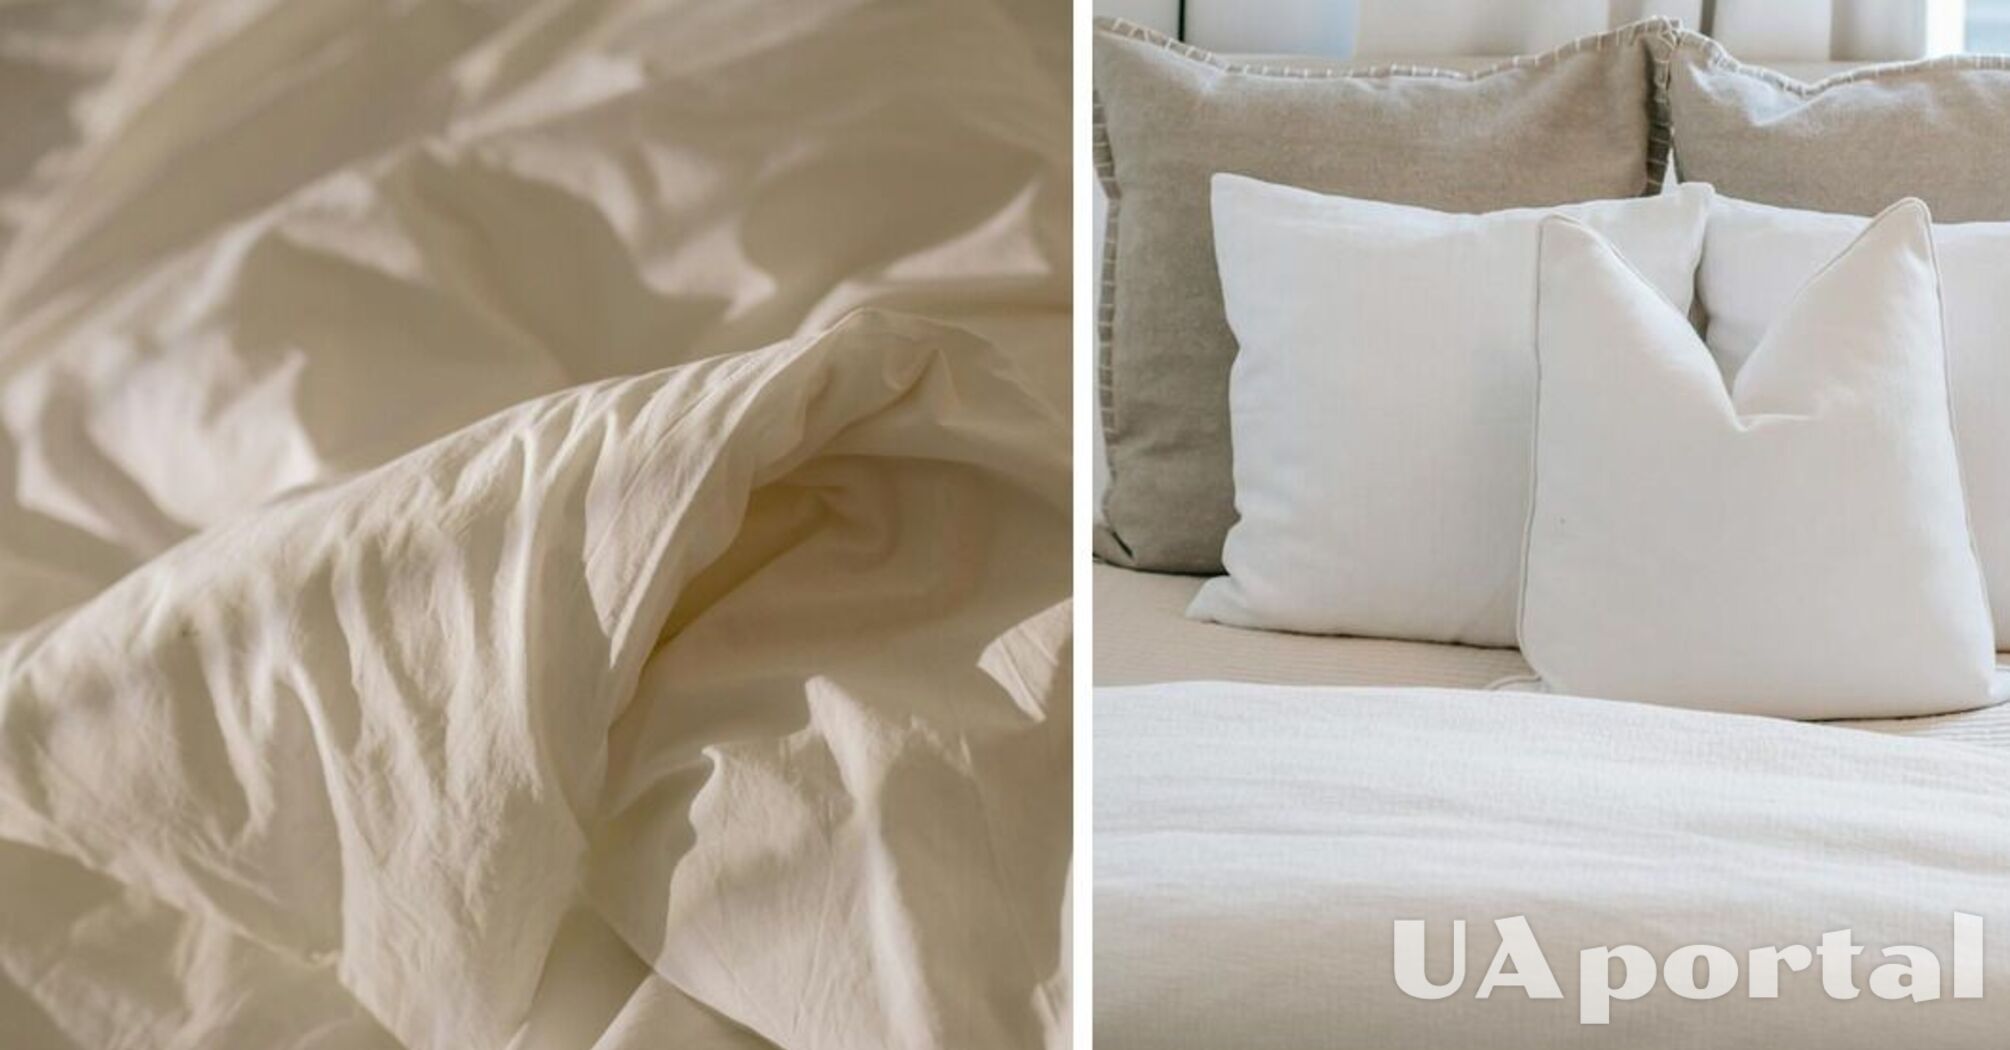 Yellowed pillows will regain their whiteness with three simple remedies